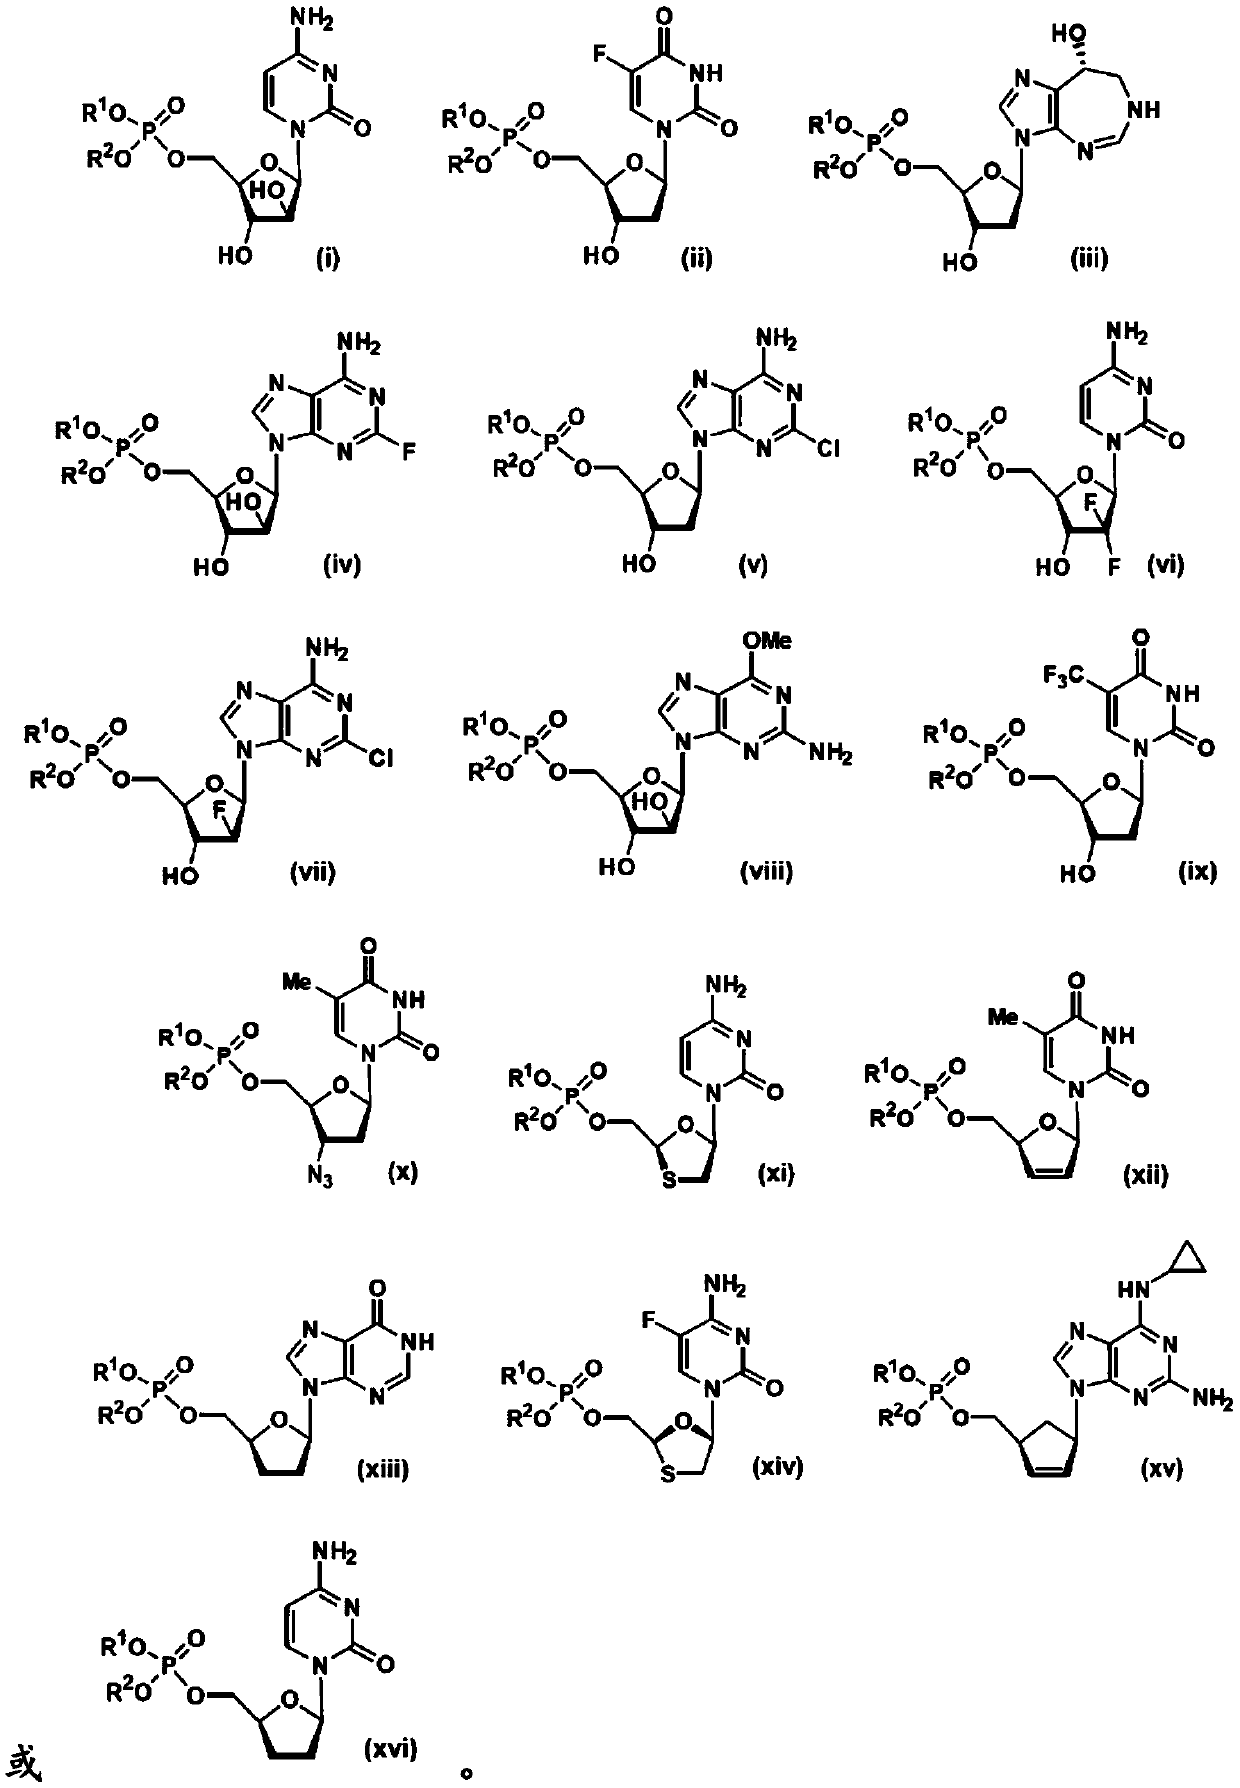 5'-position dibenzyl monophosphate derivative of nucleoside-based anticancer agent or antivirus agent